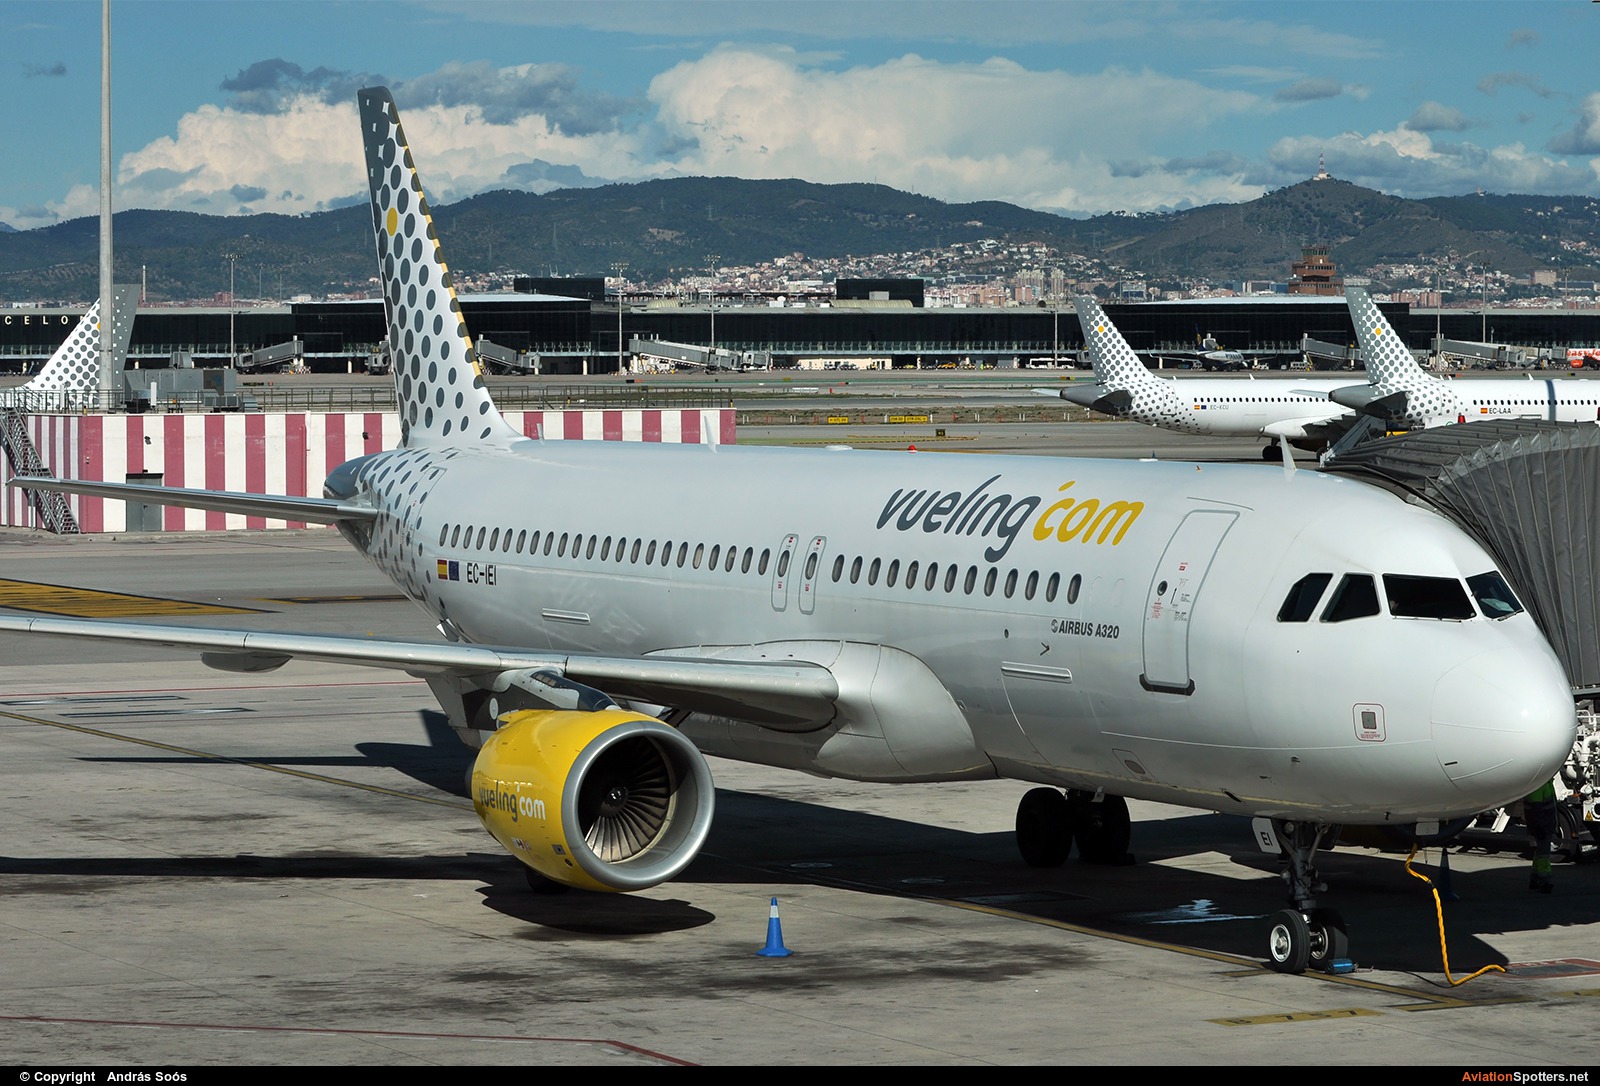 Vueling Airlines  -  A320  (EC-IEI) By András Soós (sas1965)